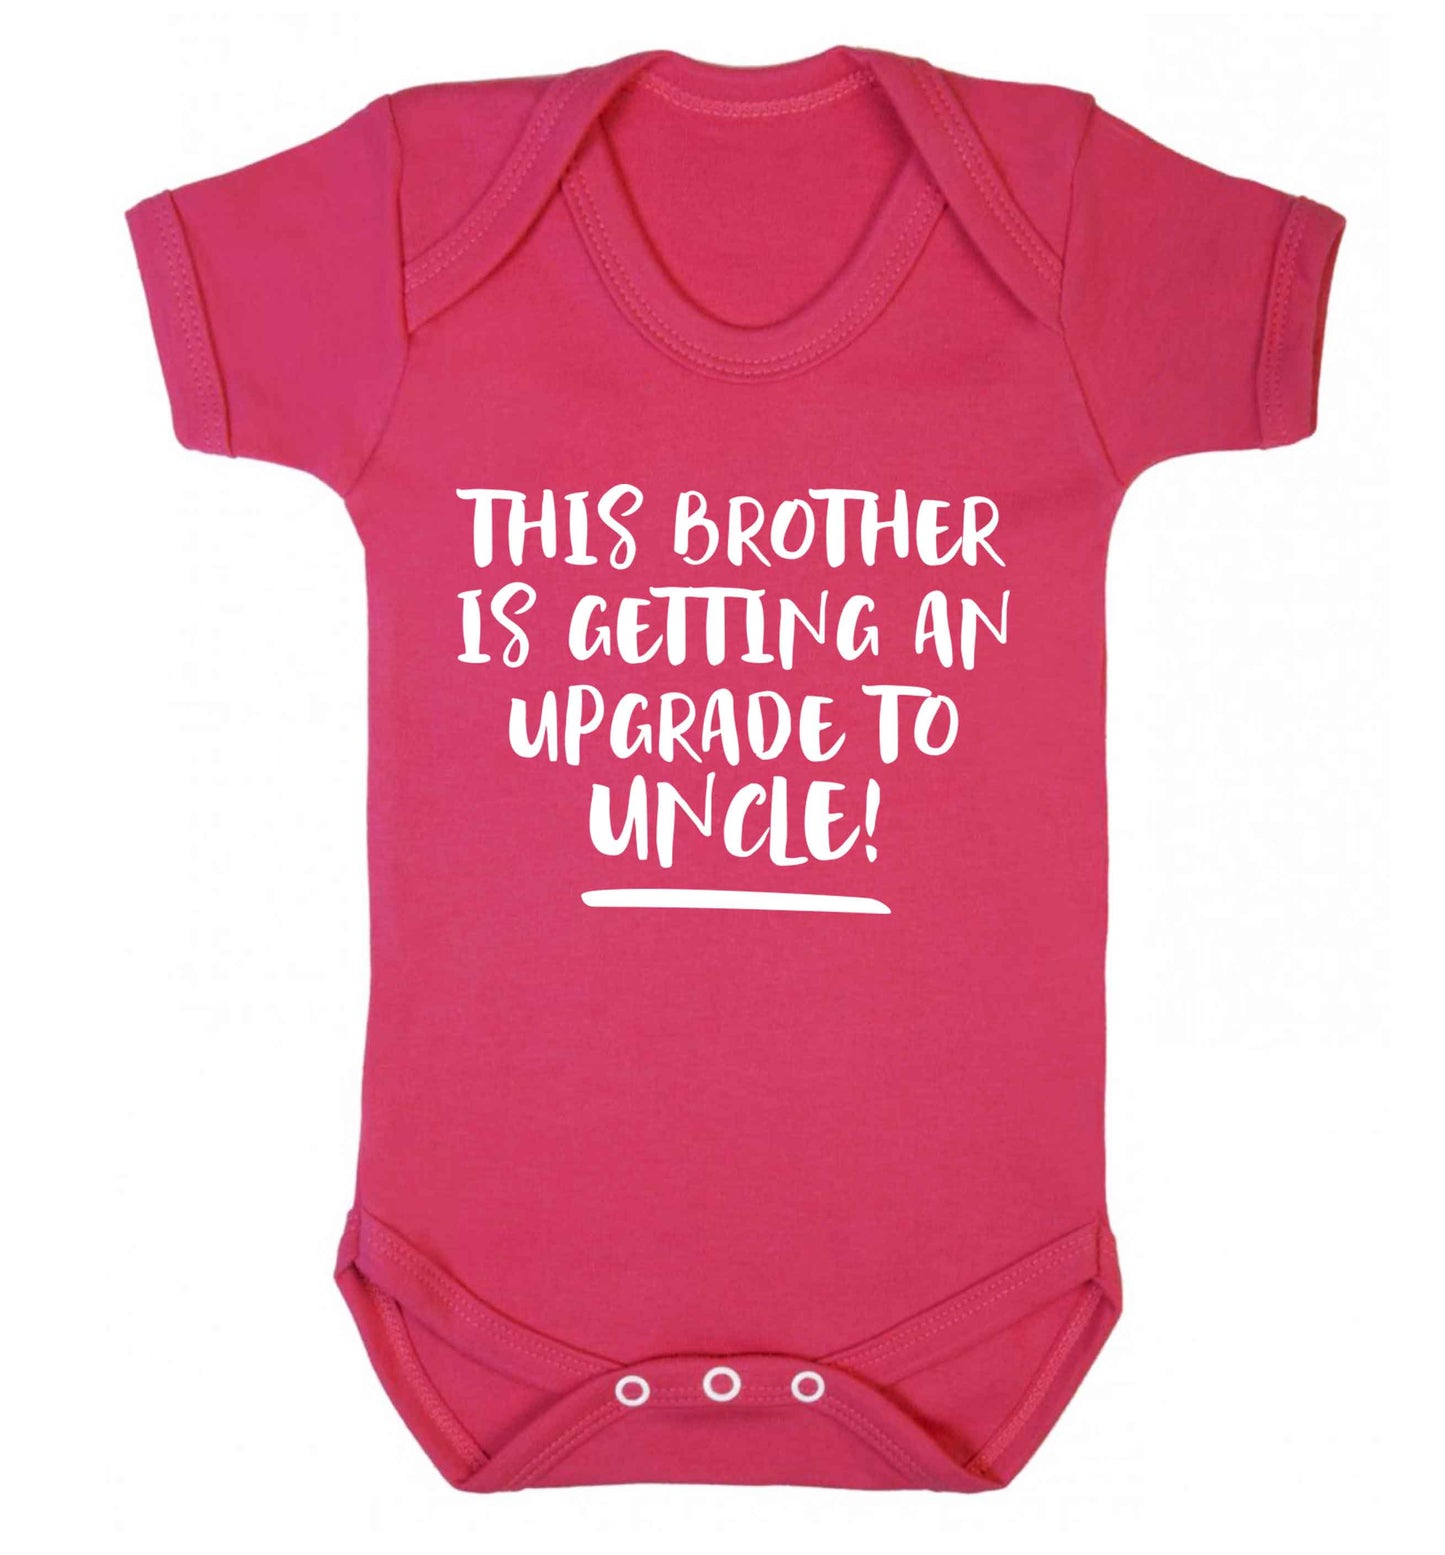 This brother is getting an upgrade to uncle! Baby Vest dark pink 18-24 months